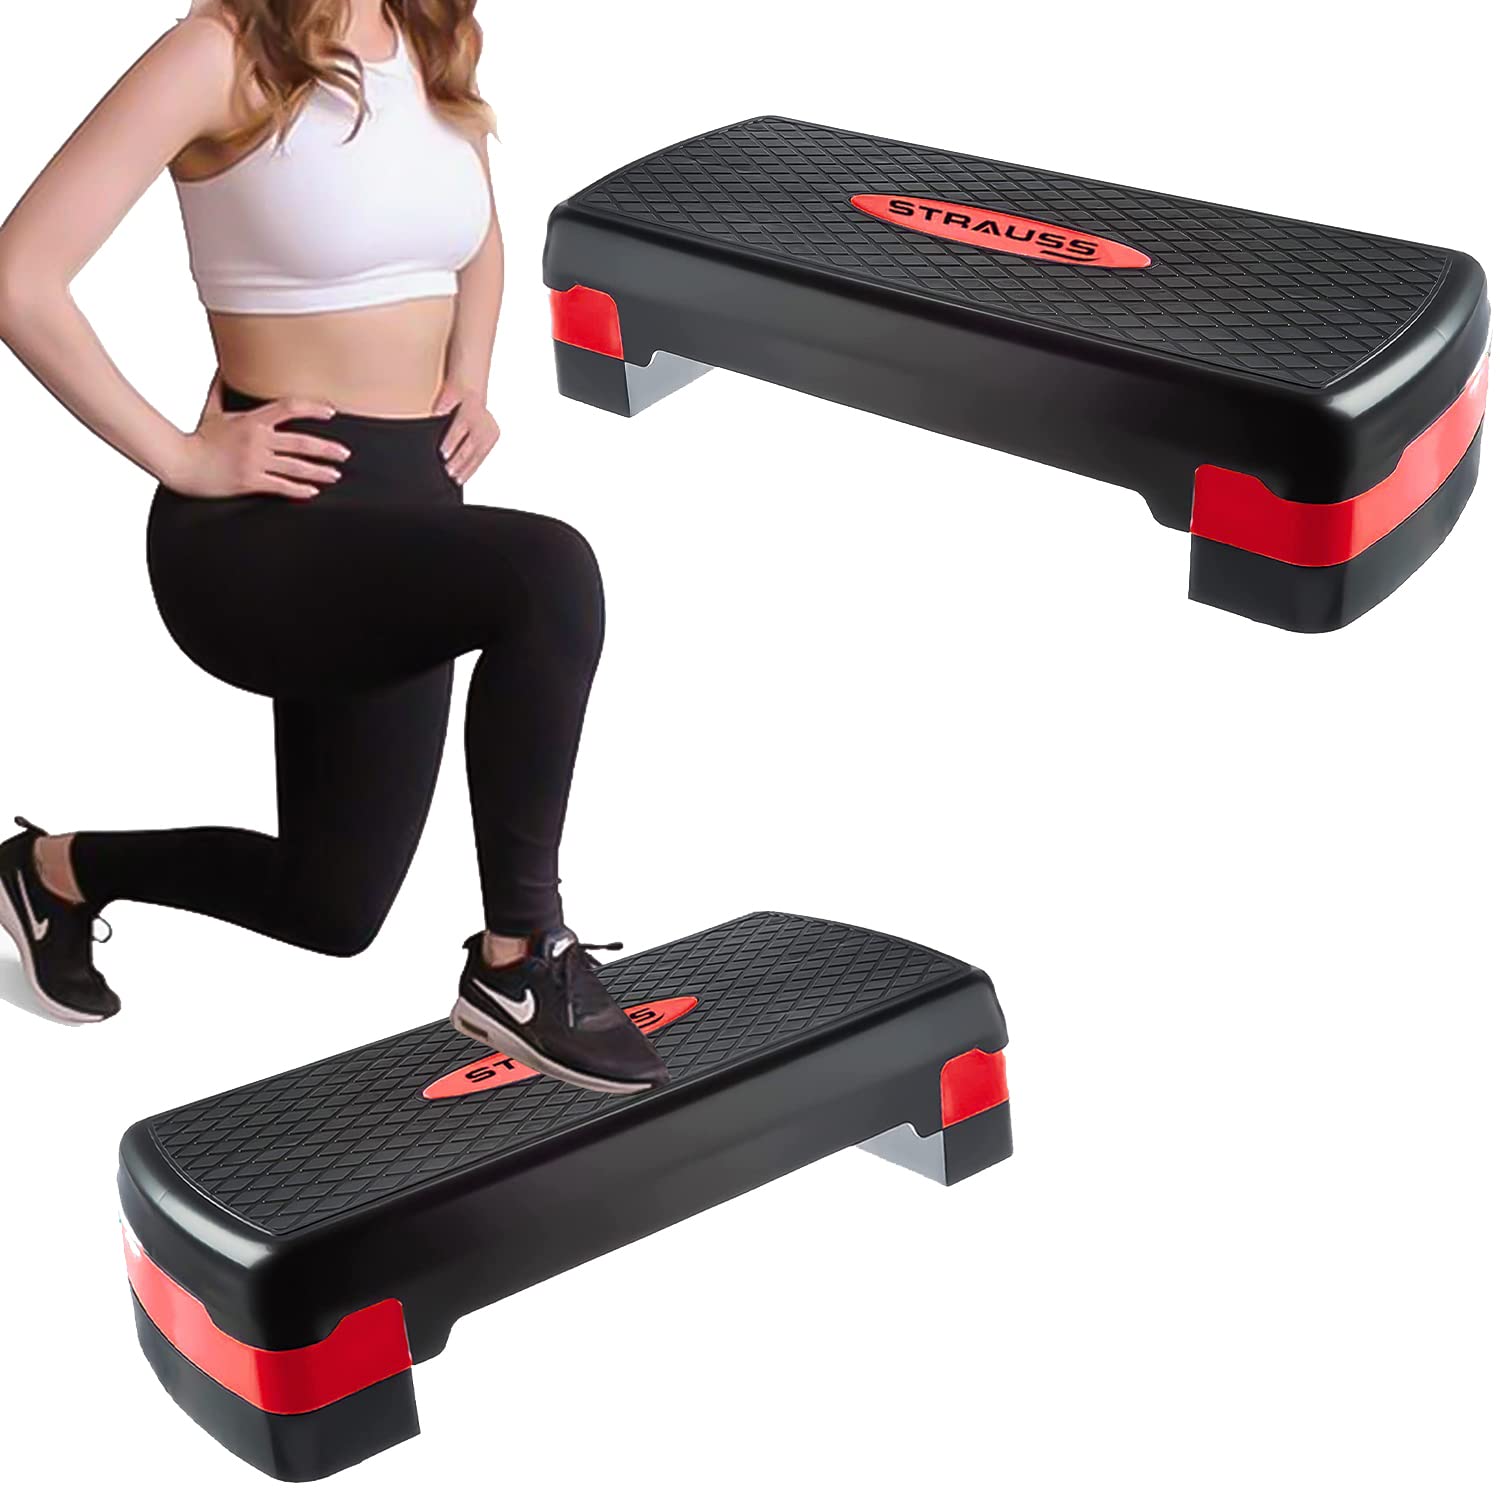 Strauss Aerobic Stepper | Two Height Level Adjustments - 4 inches and 6 inches | Slip-Resistant & Shock Absorbing Platform for Extra-Durability - Supports Upto 200 KG, (Red)